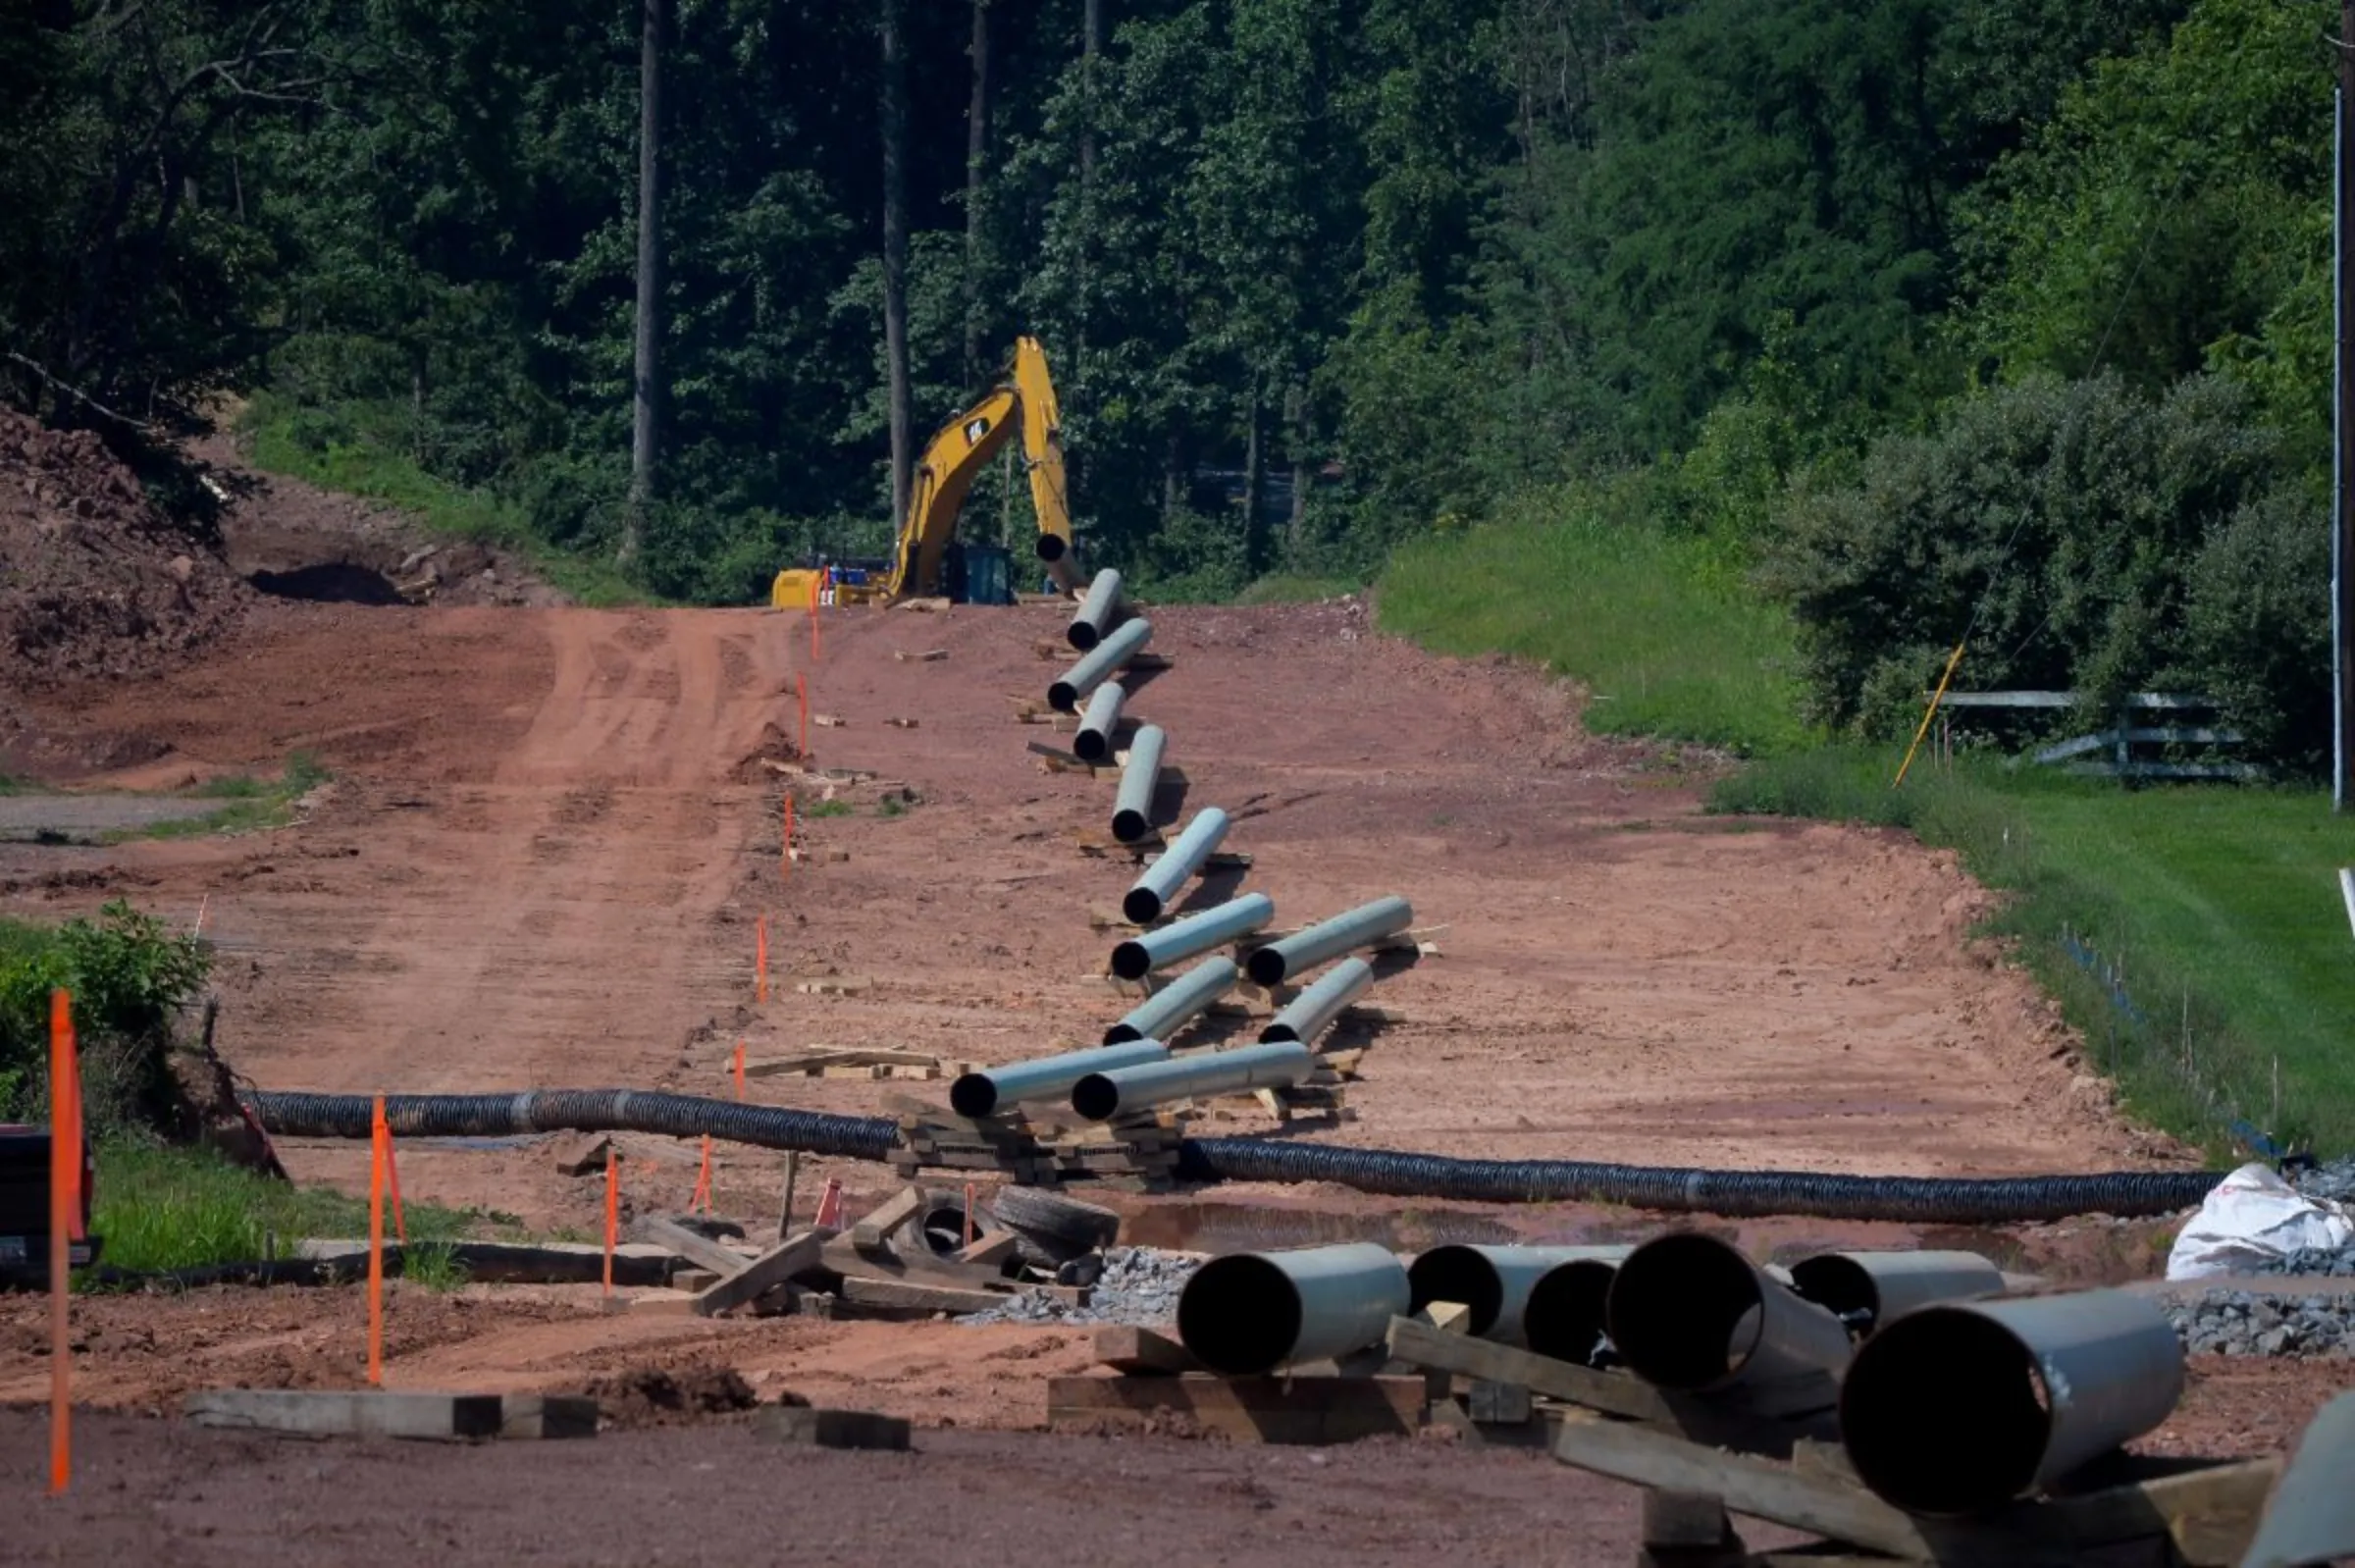 Construction work continues on Sunoco's Mariner East II natural gas pipeline near Morgantown in Chester County, Pennsylvania, August 1, 2017